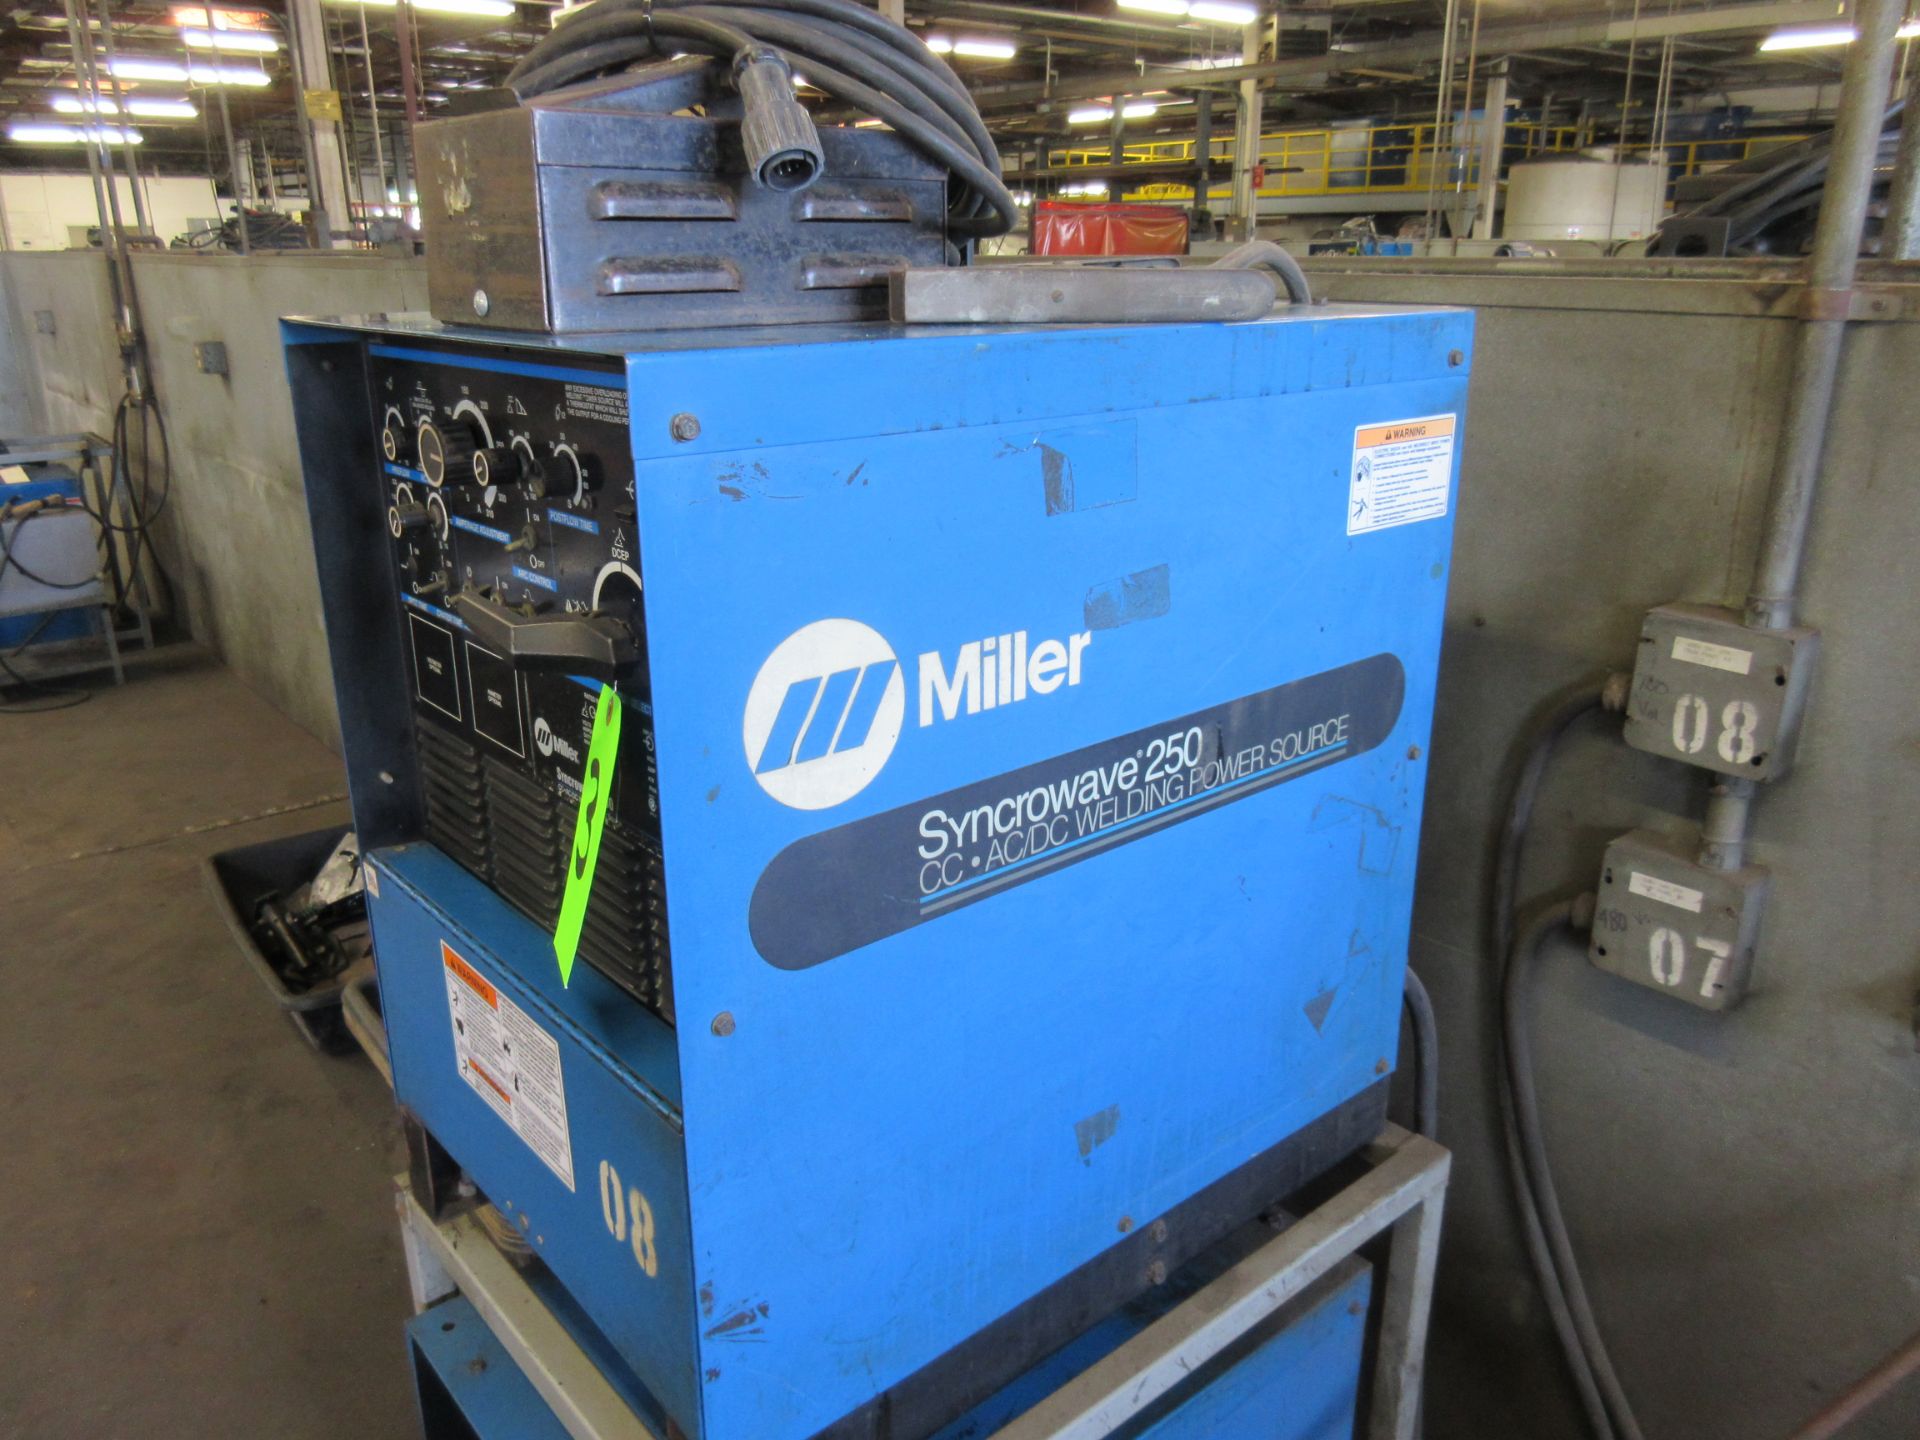 MILLER SYNCROWAVE 250 CONSTANT CURRENT AC/DC ARC WELDER W/ FOOT CONTROL - Image 2 of 3